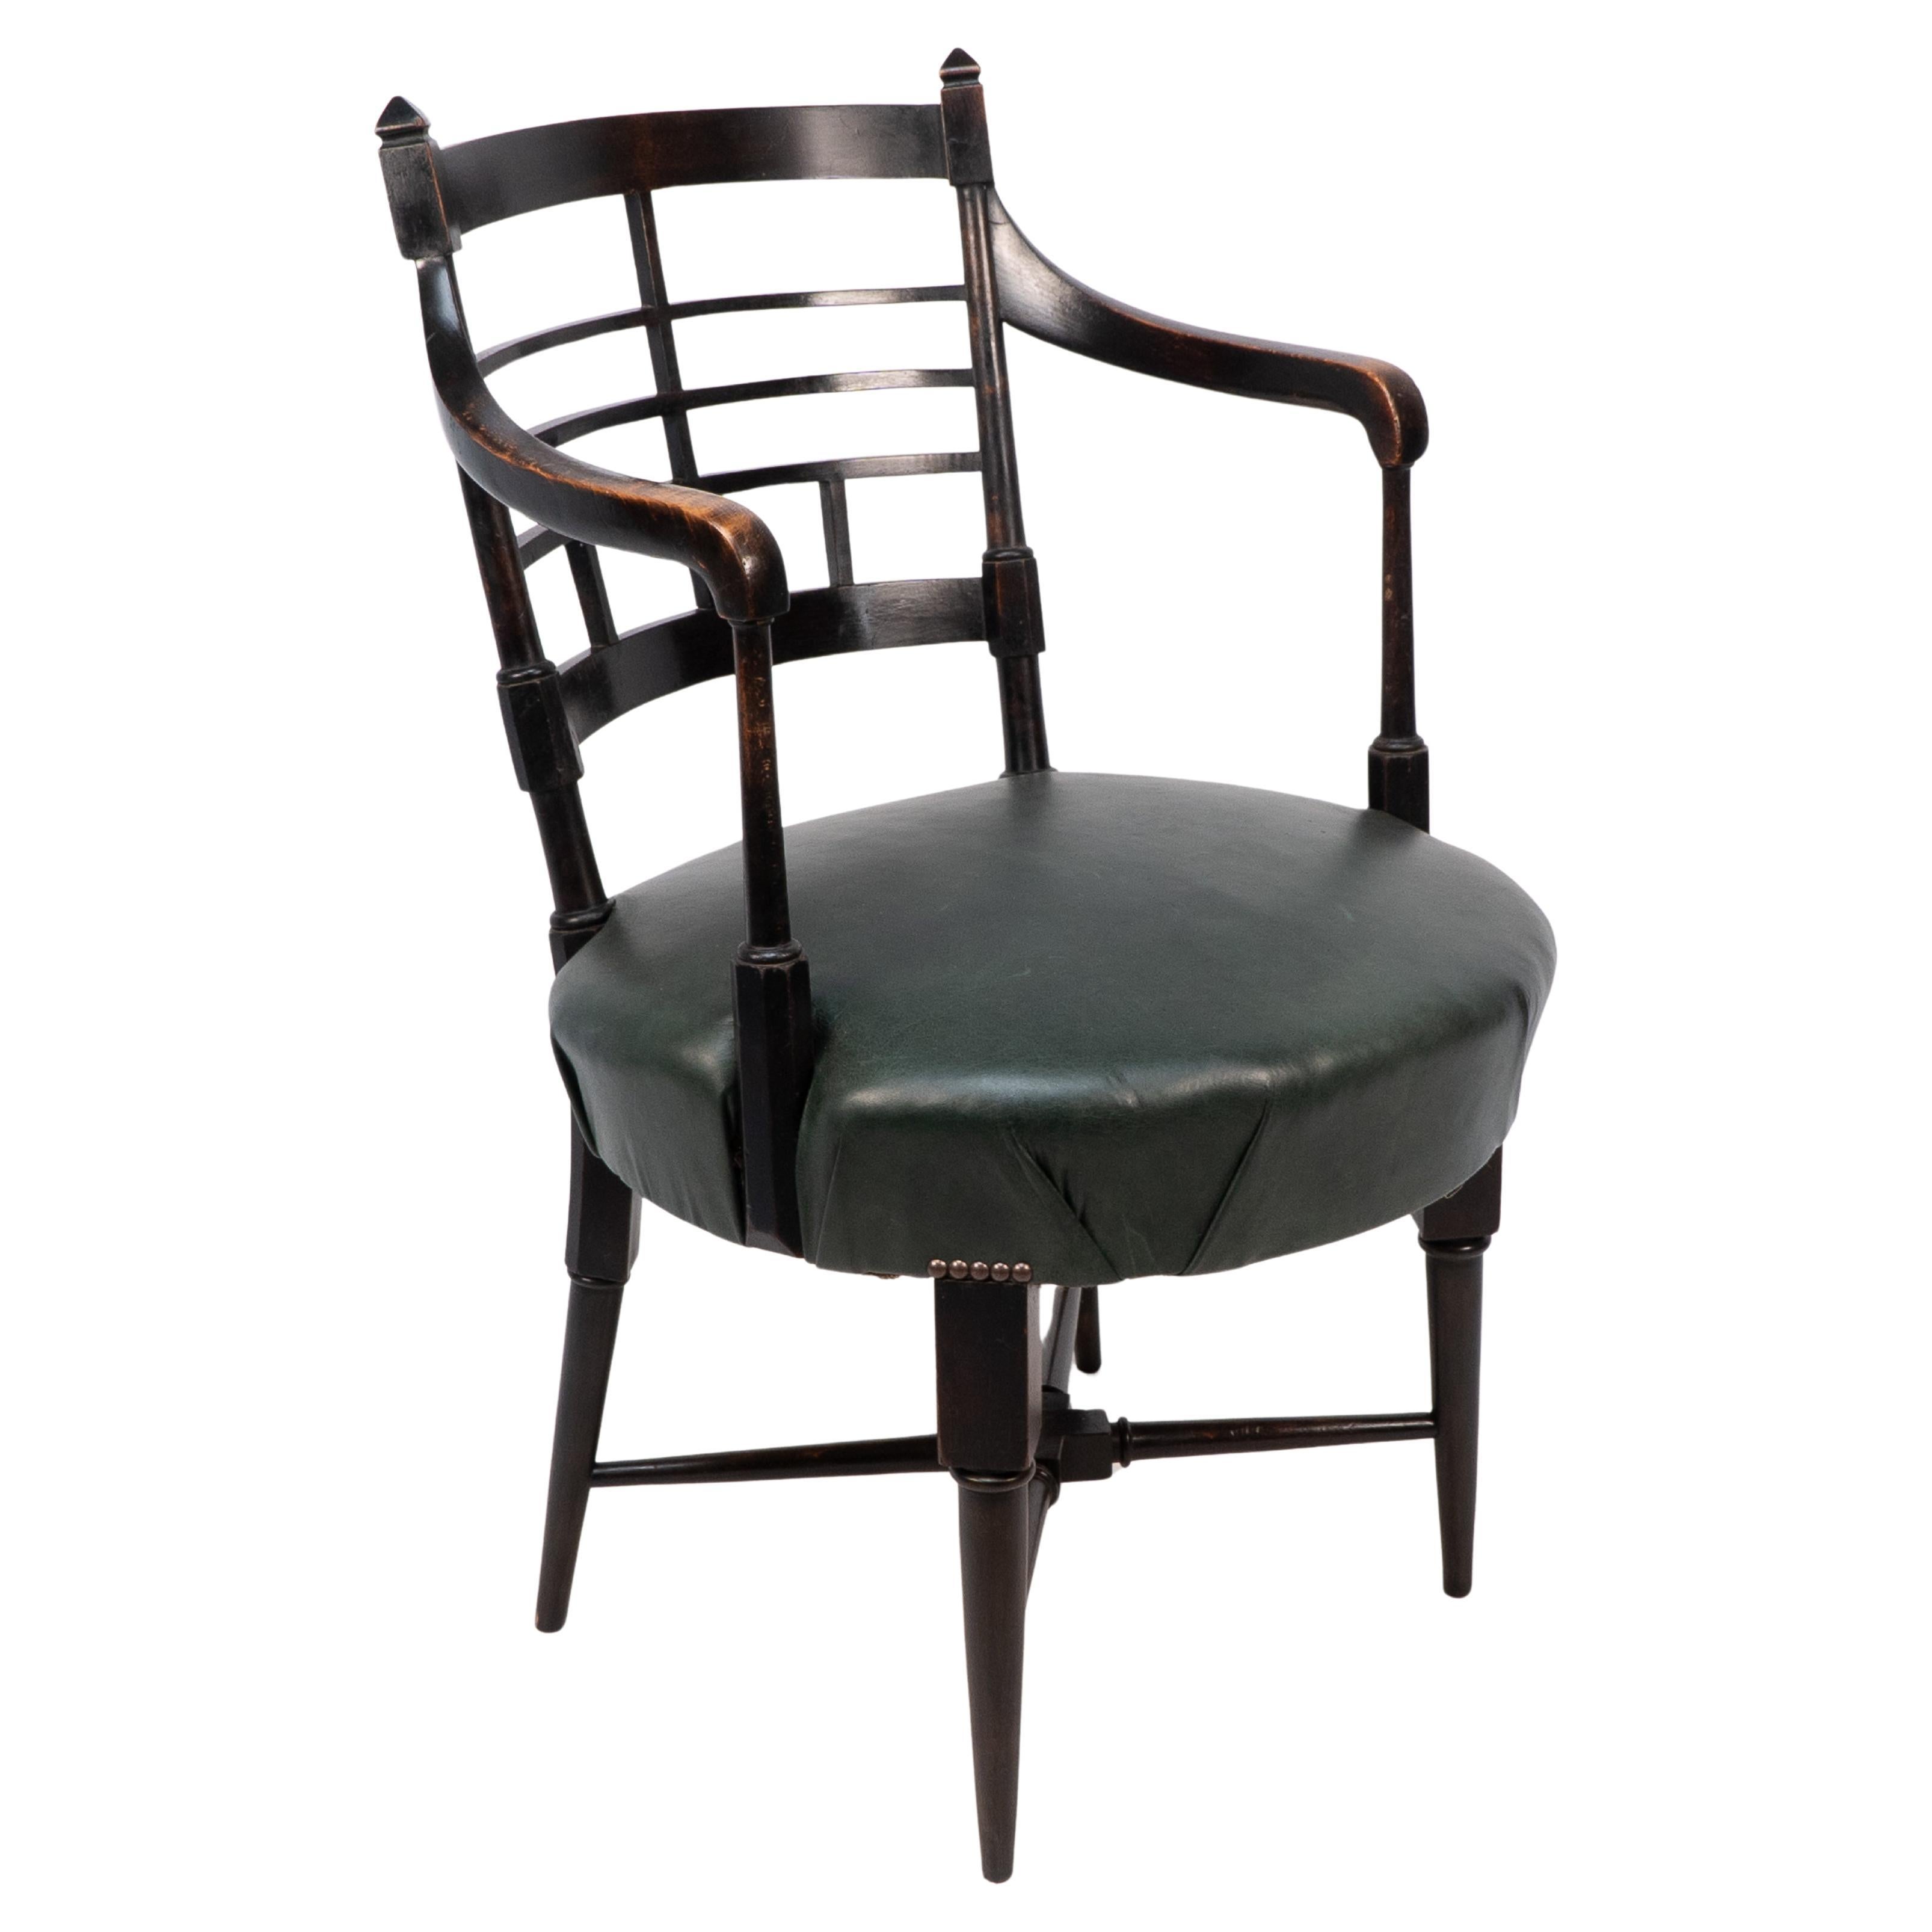 E W Godwin for William Watt. An Anglo-Japanese Old English or Jacobean armchair For Sale